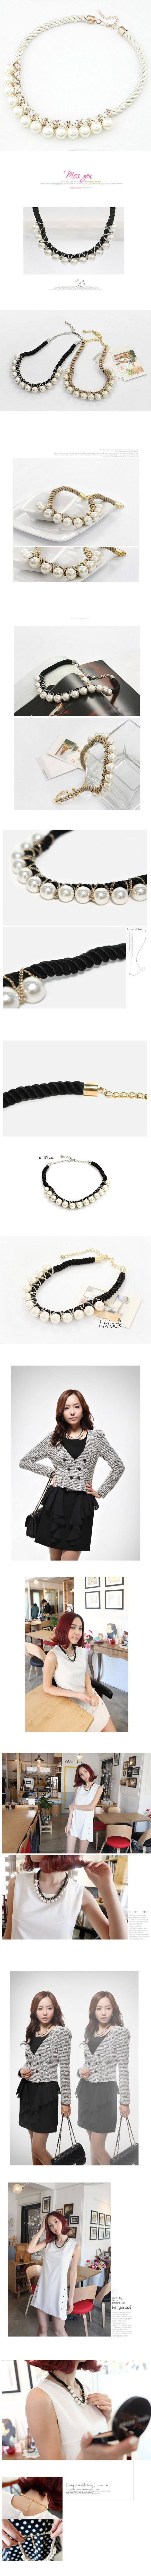 Hot White Handmade Weave Imitate Pearl,Beaded Necklaces